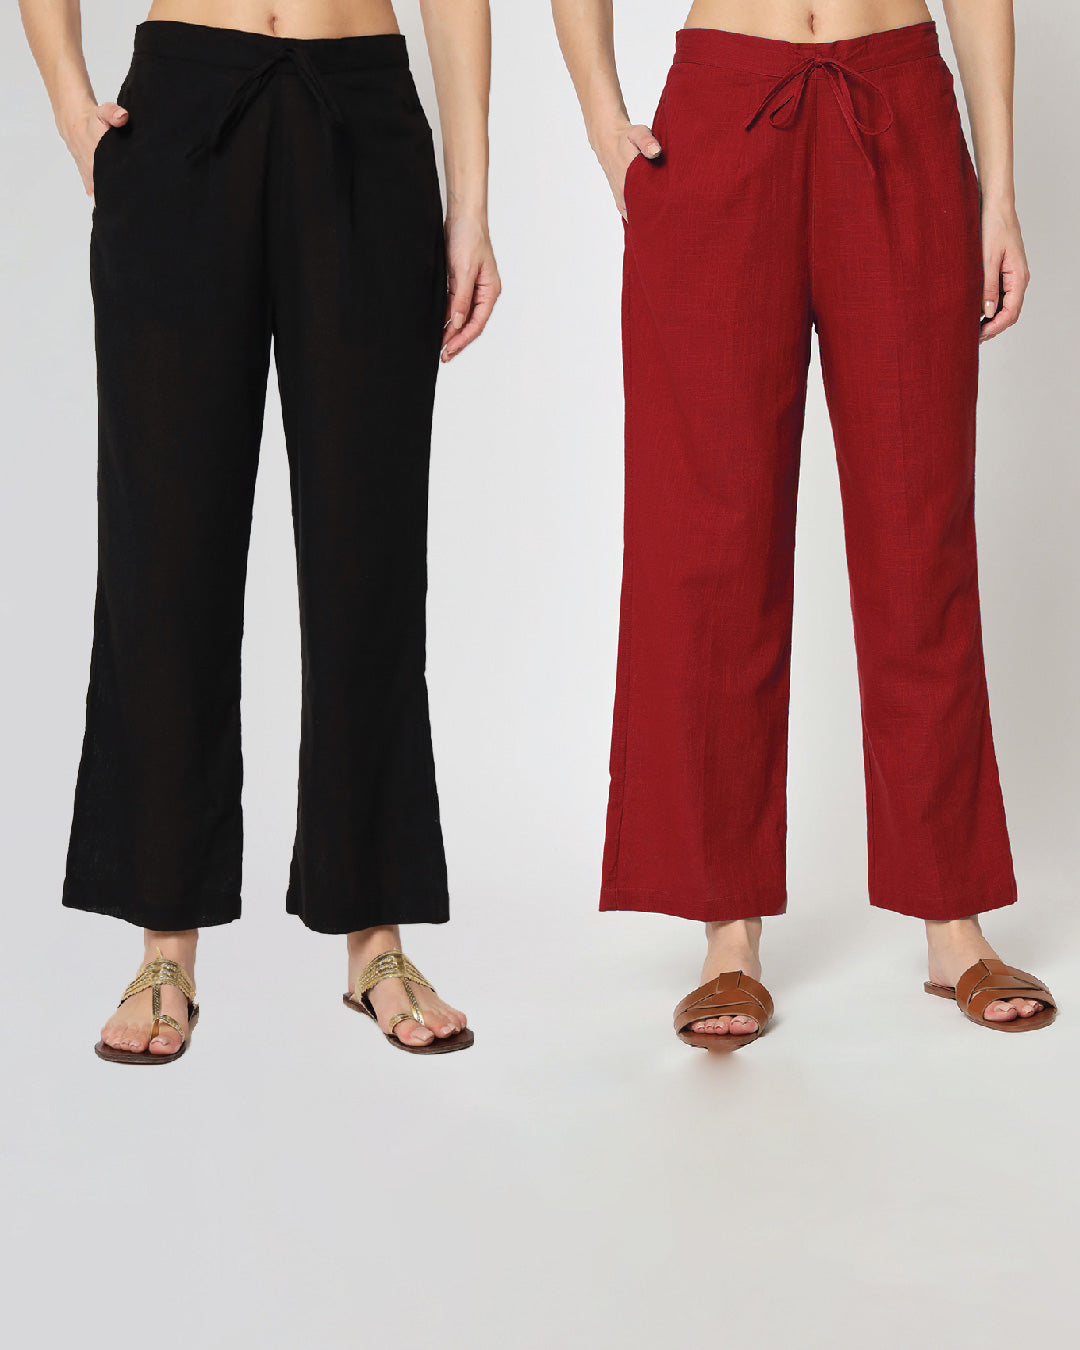 Combo: Black & Classic Red Straight Pants- Set of 2